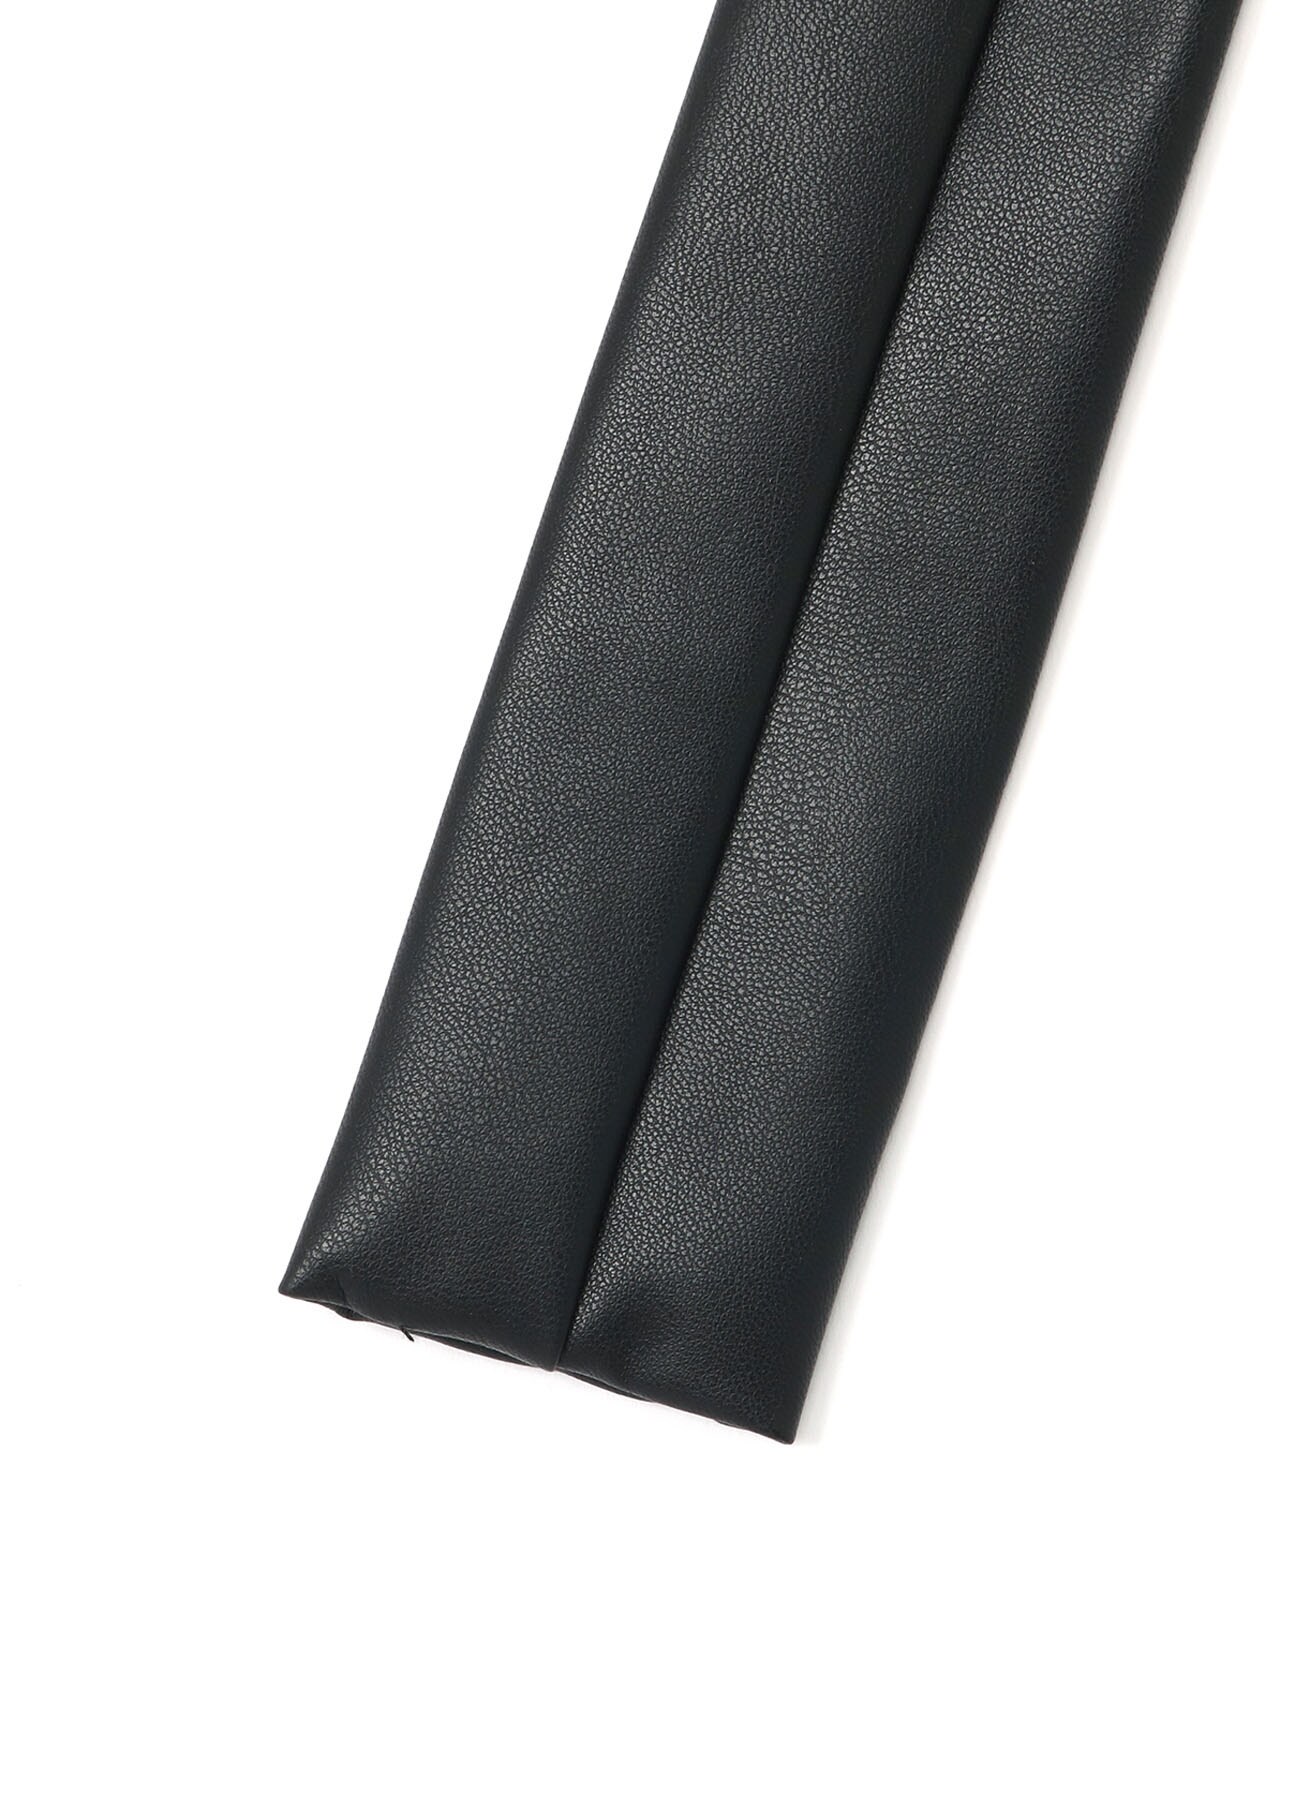 Synthetic leather Narrow Square Tie